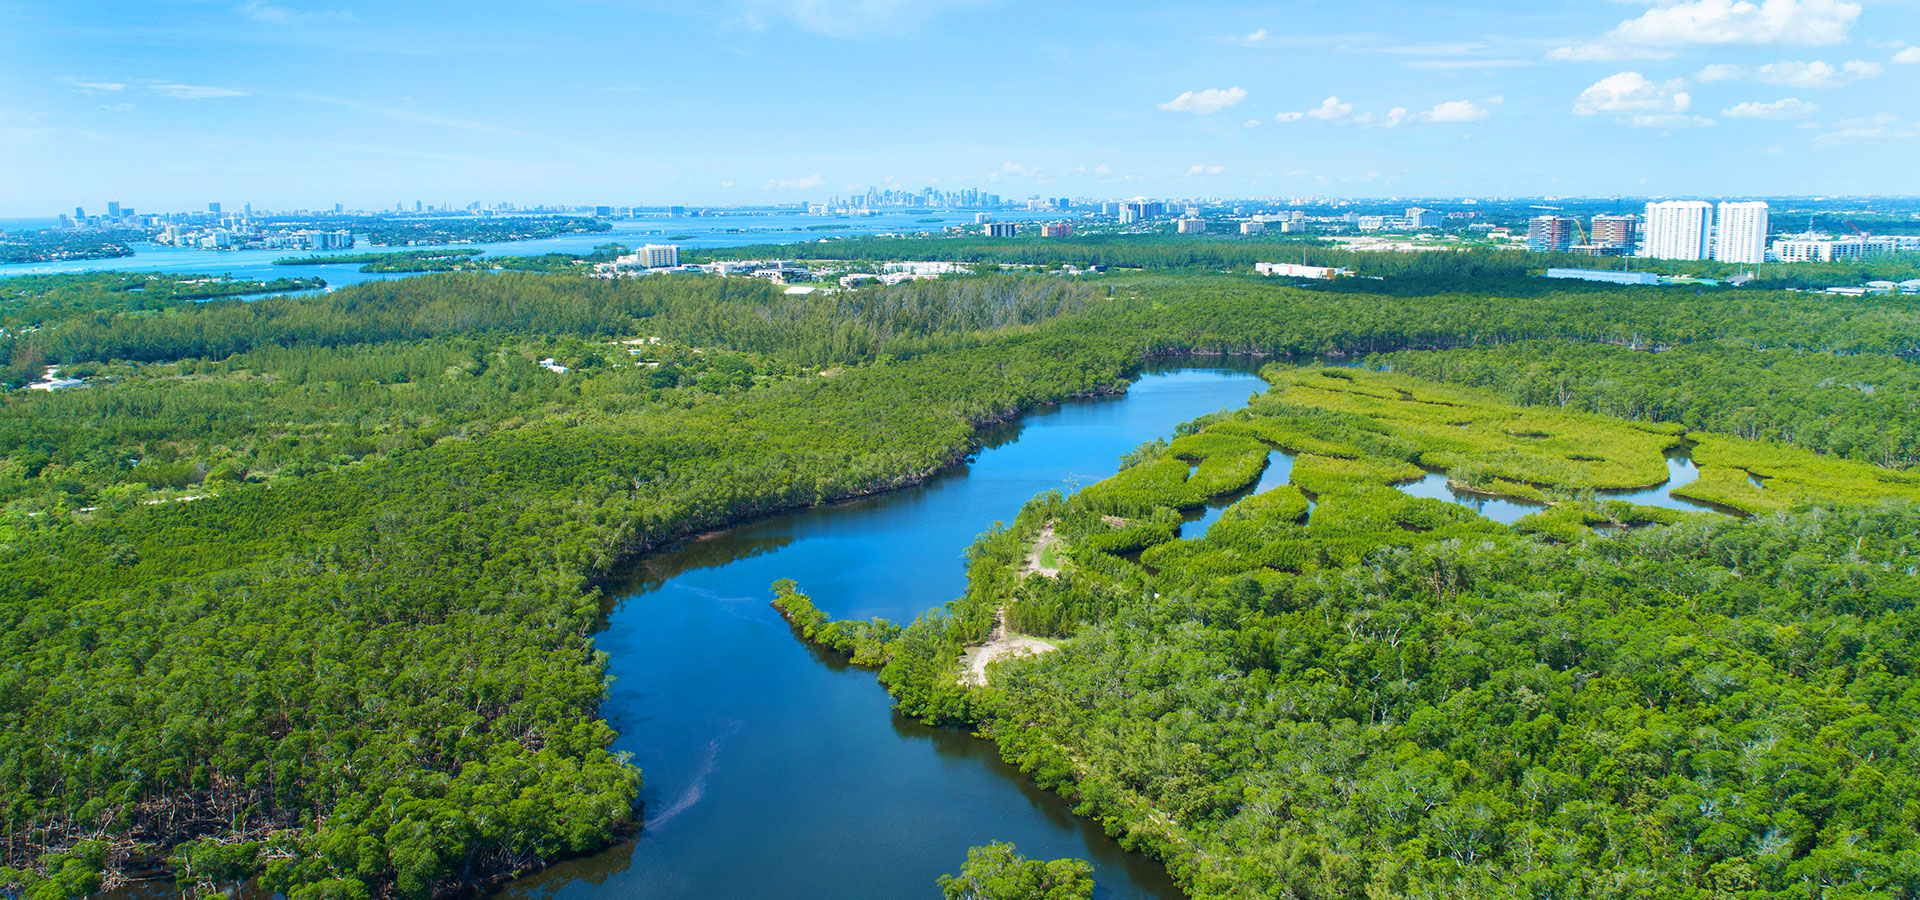 Oleta River State Park Aerial View with Sunny Isles Beach in the background